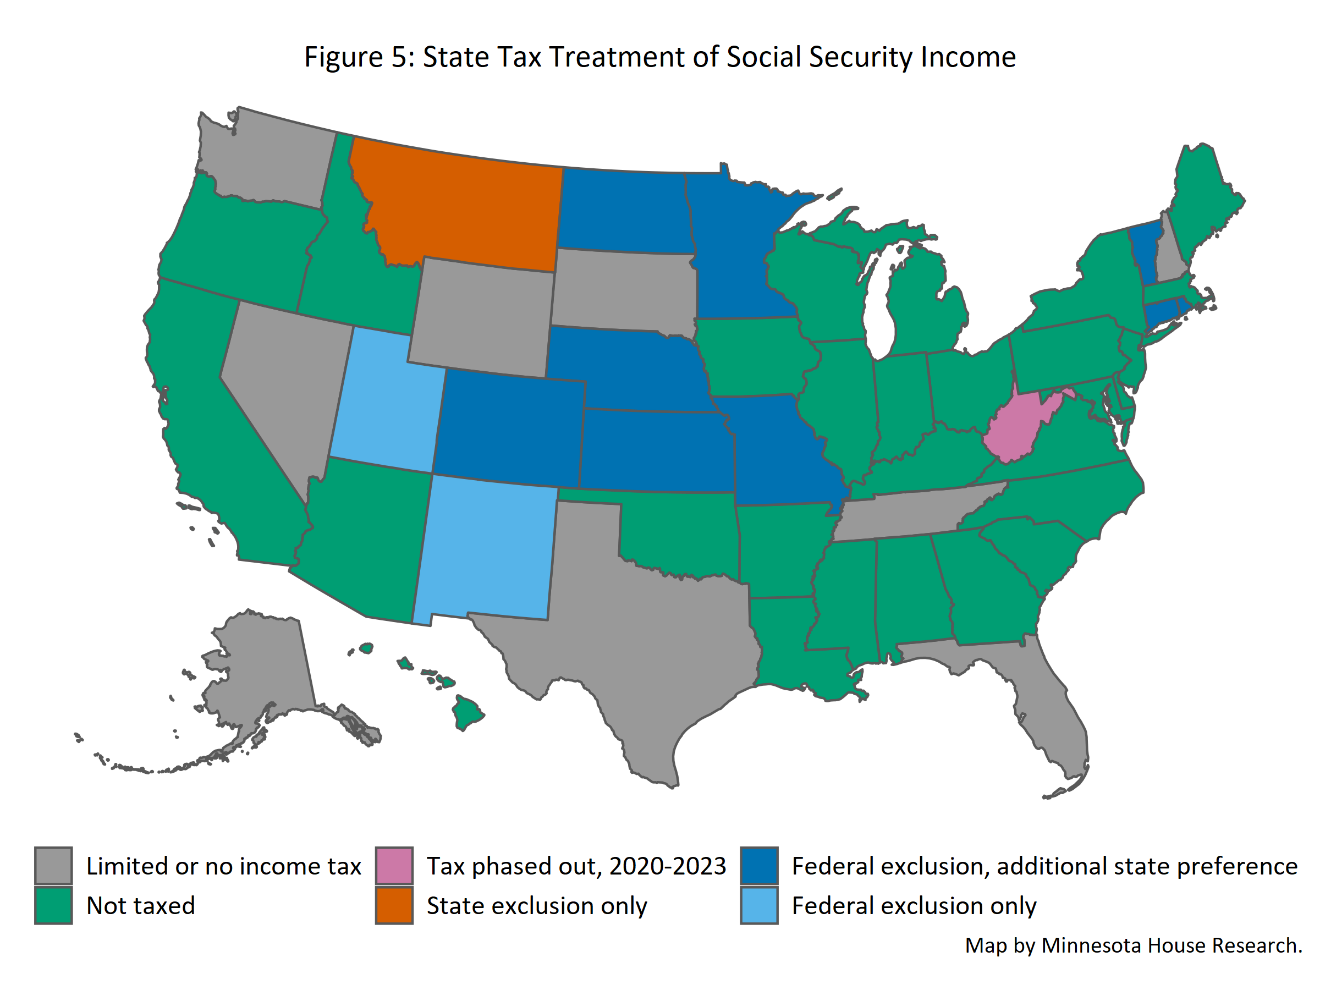 Graph for state tax treatment of social security income